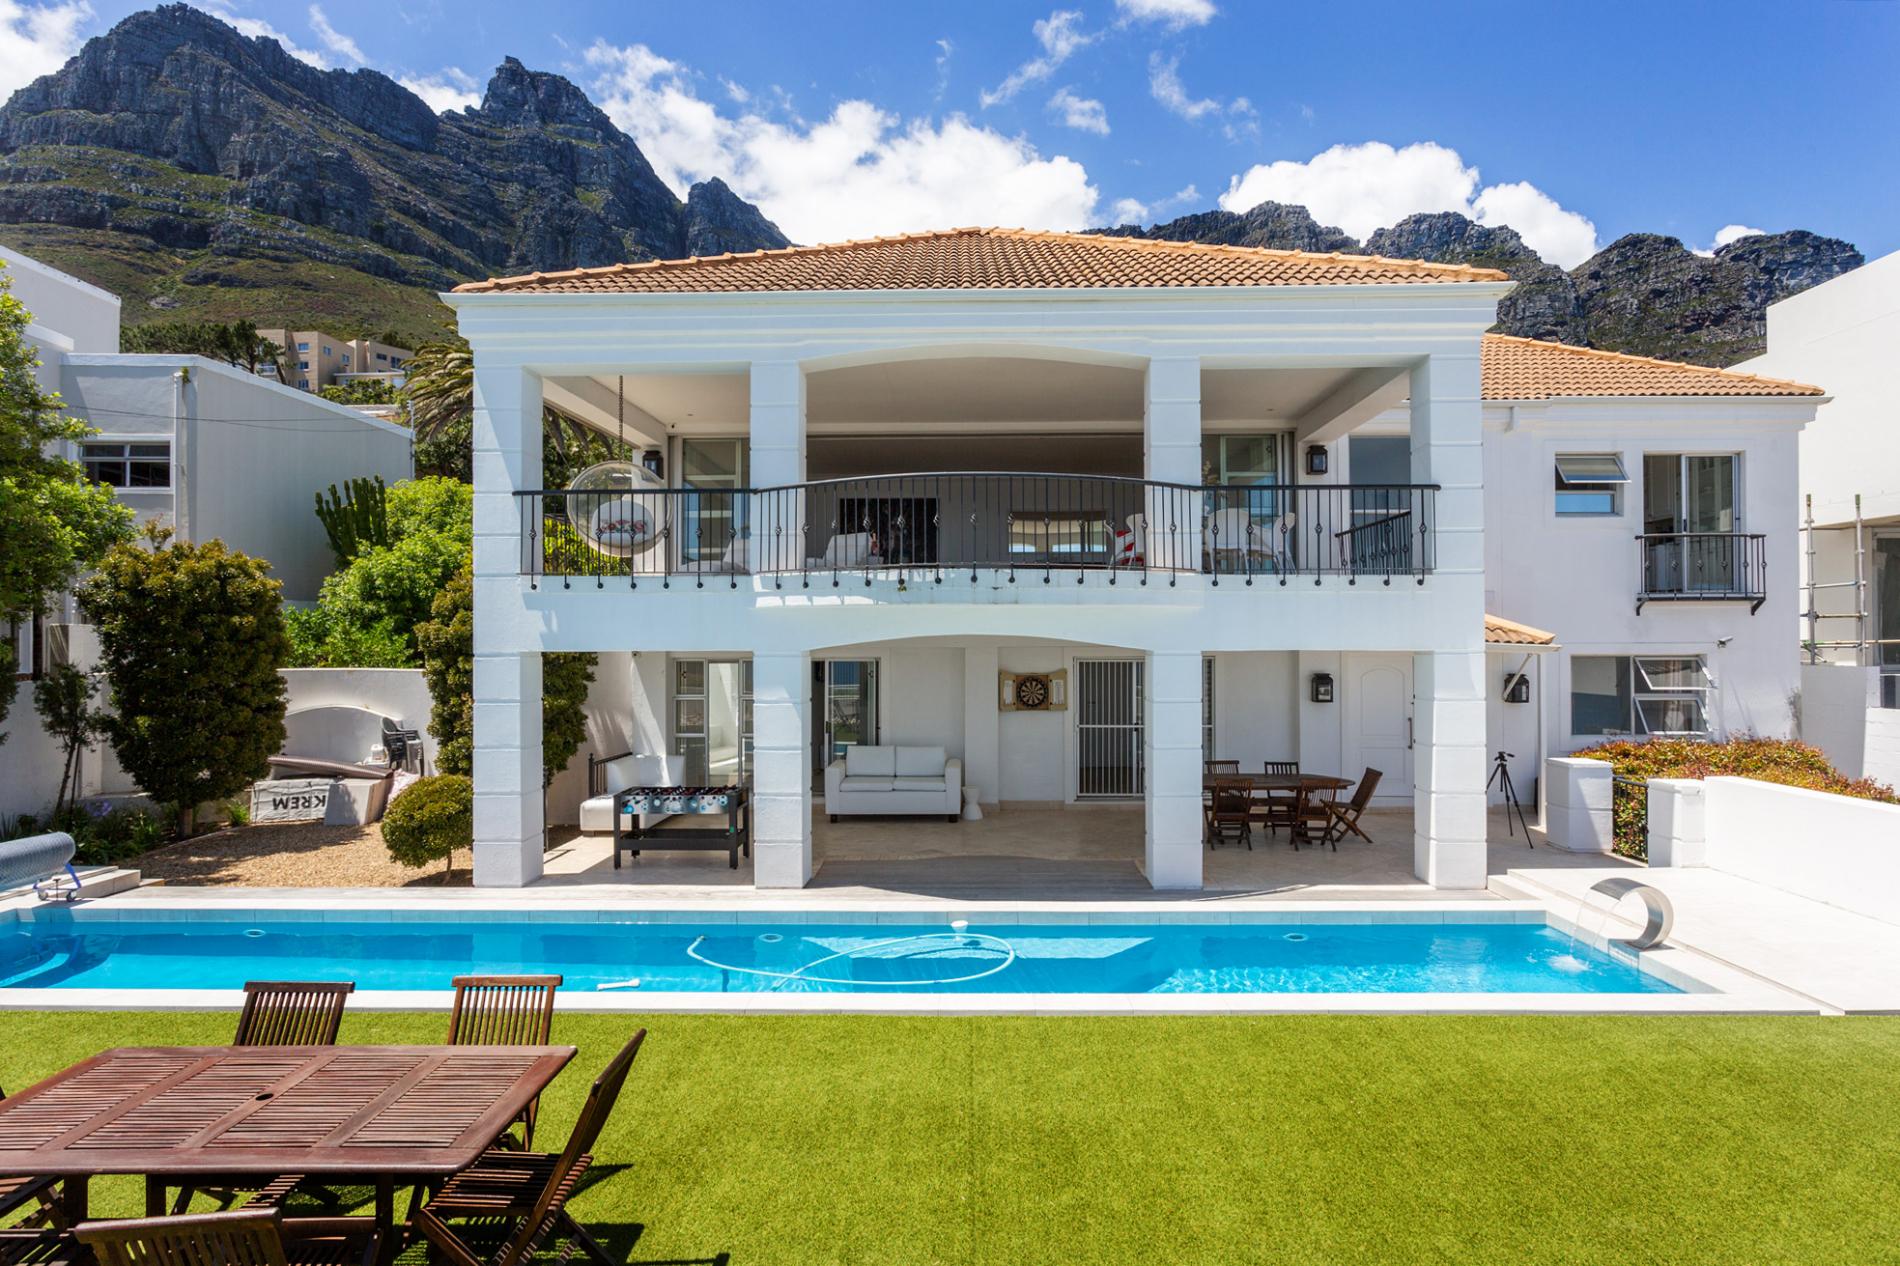 Property Image 1 - Lovely Spacious Villa close to Camps Bay Beach